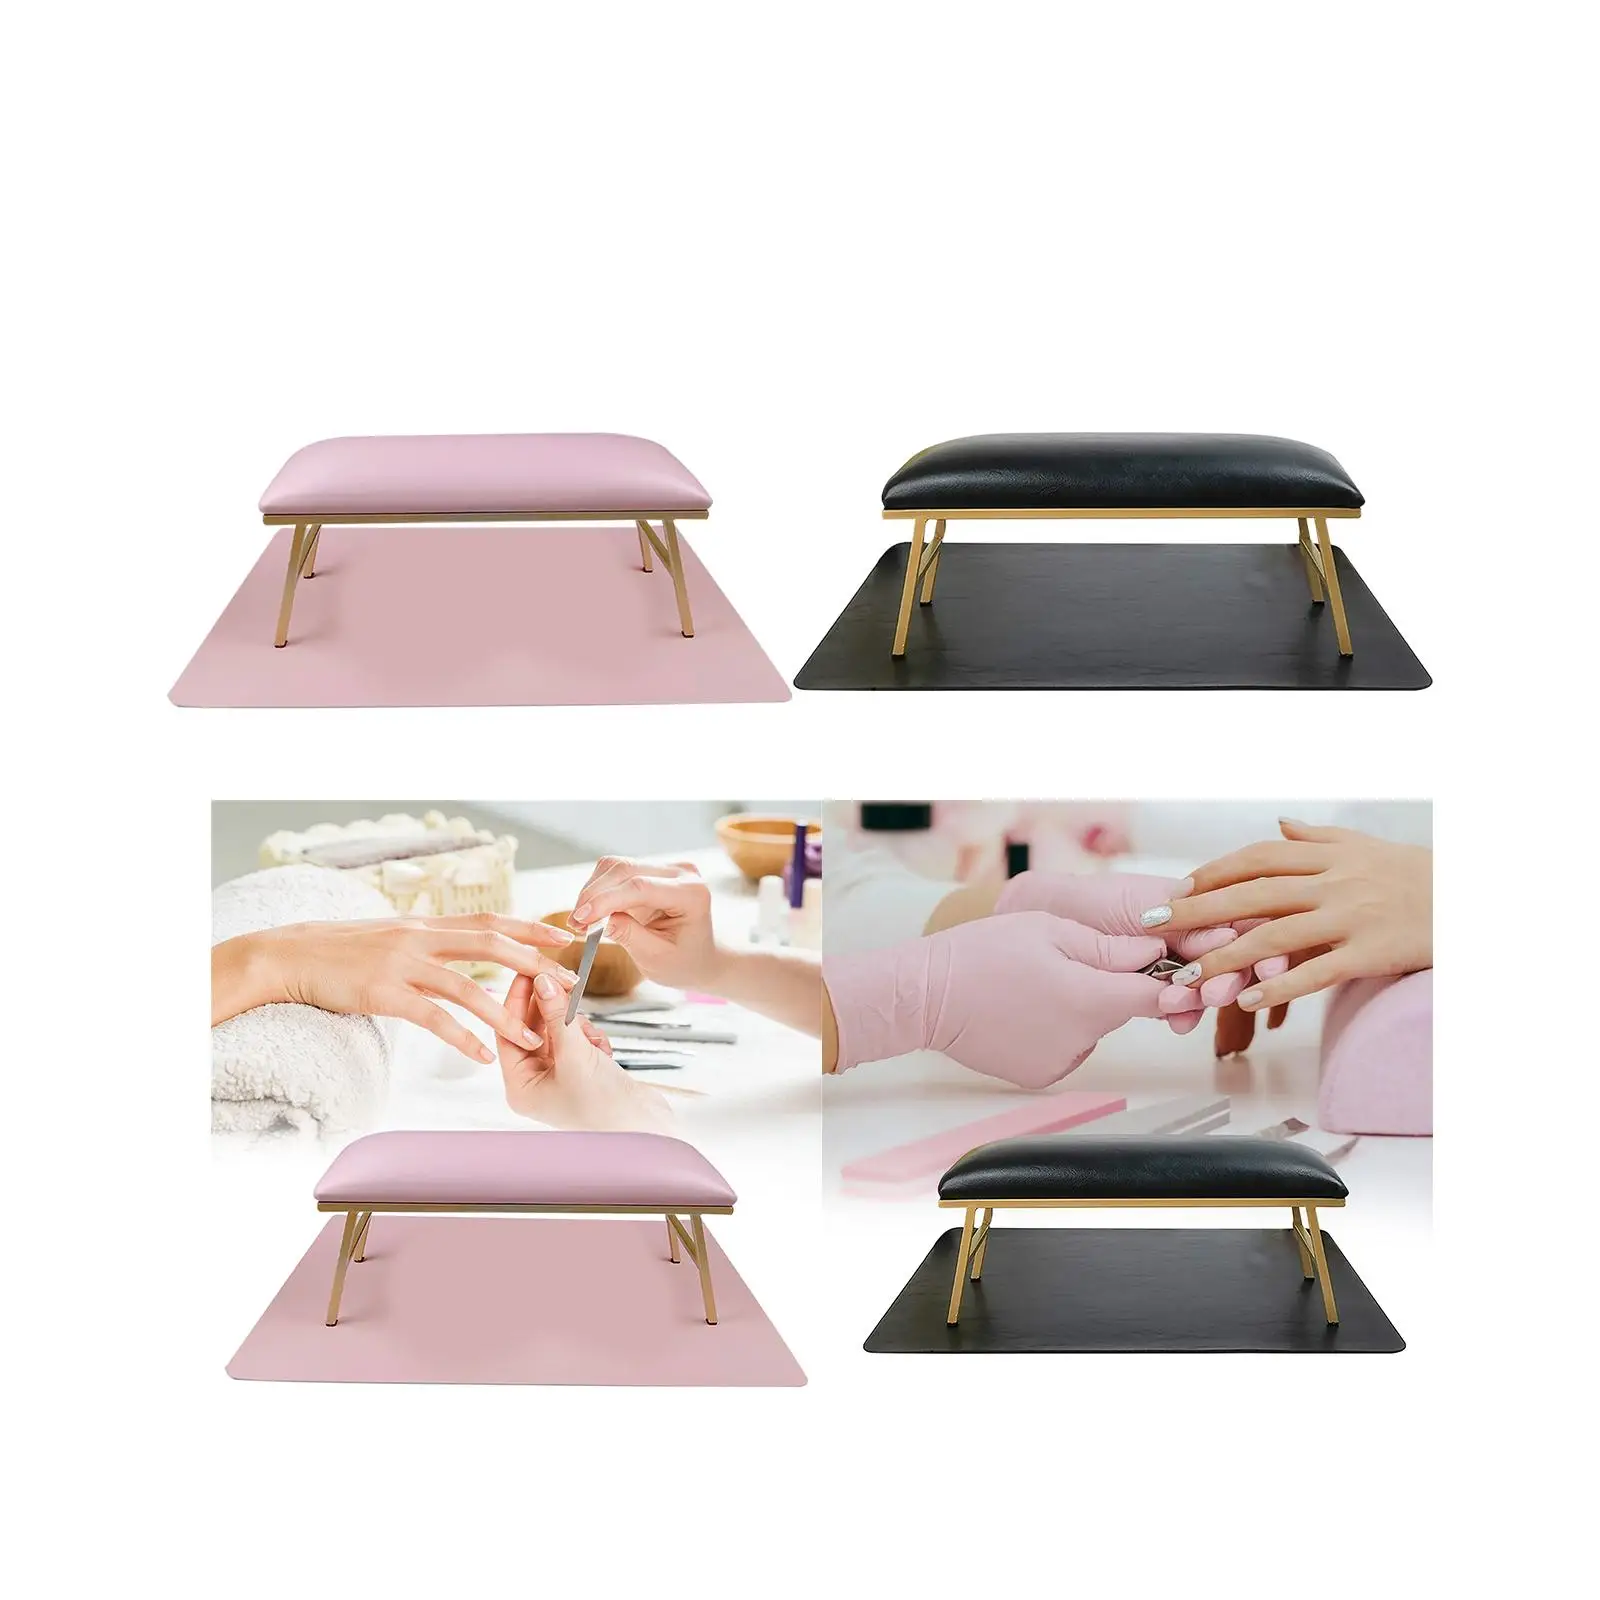 Nail Hand Pillow and Mat Set Comfortable Soft Non Slip Nail Hand Rest Holder for Manicurist Salon Home Nail Technician Use Arm